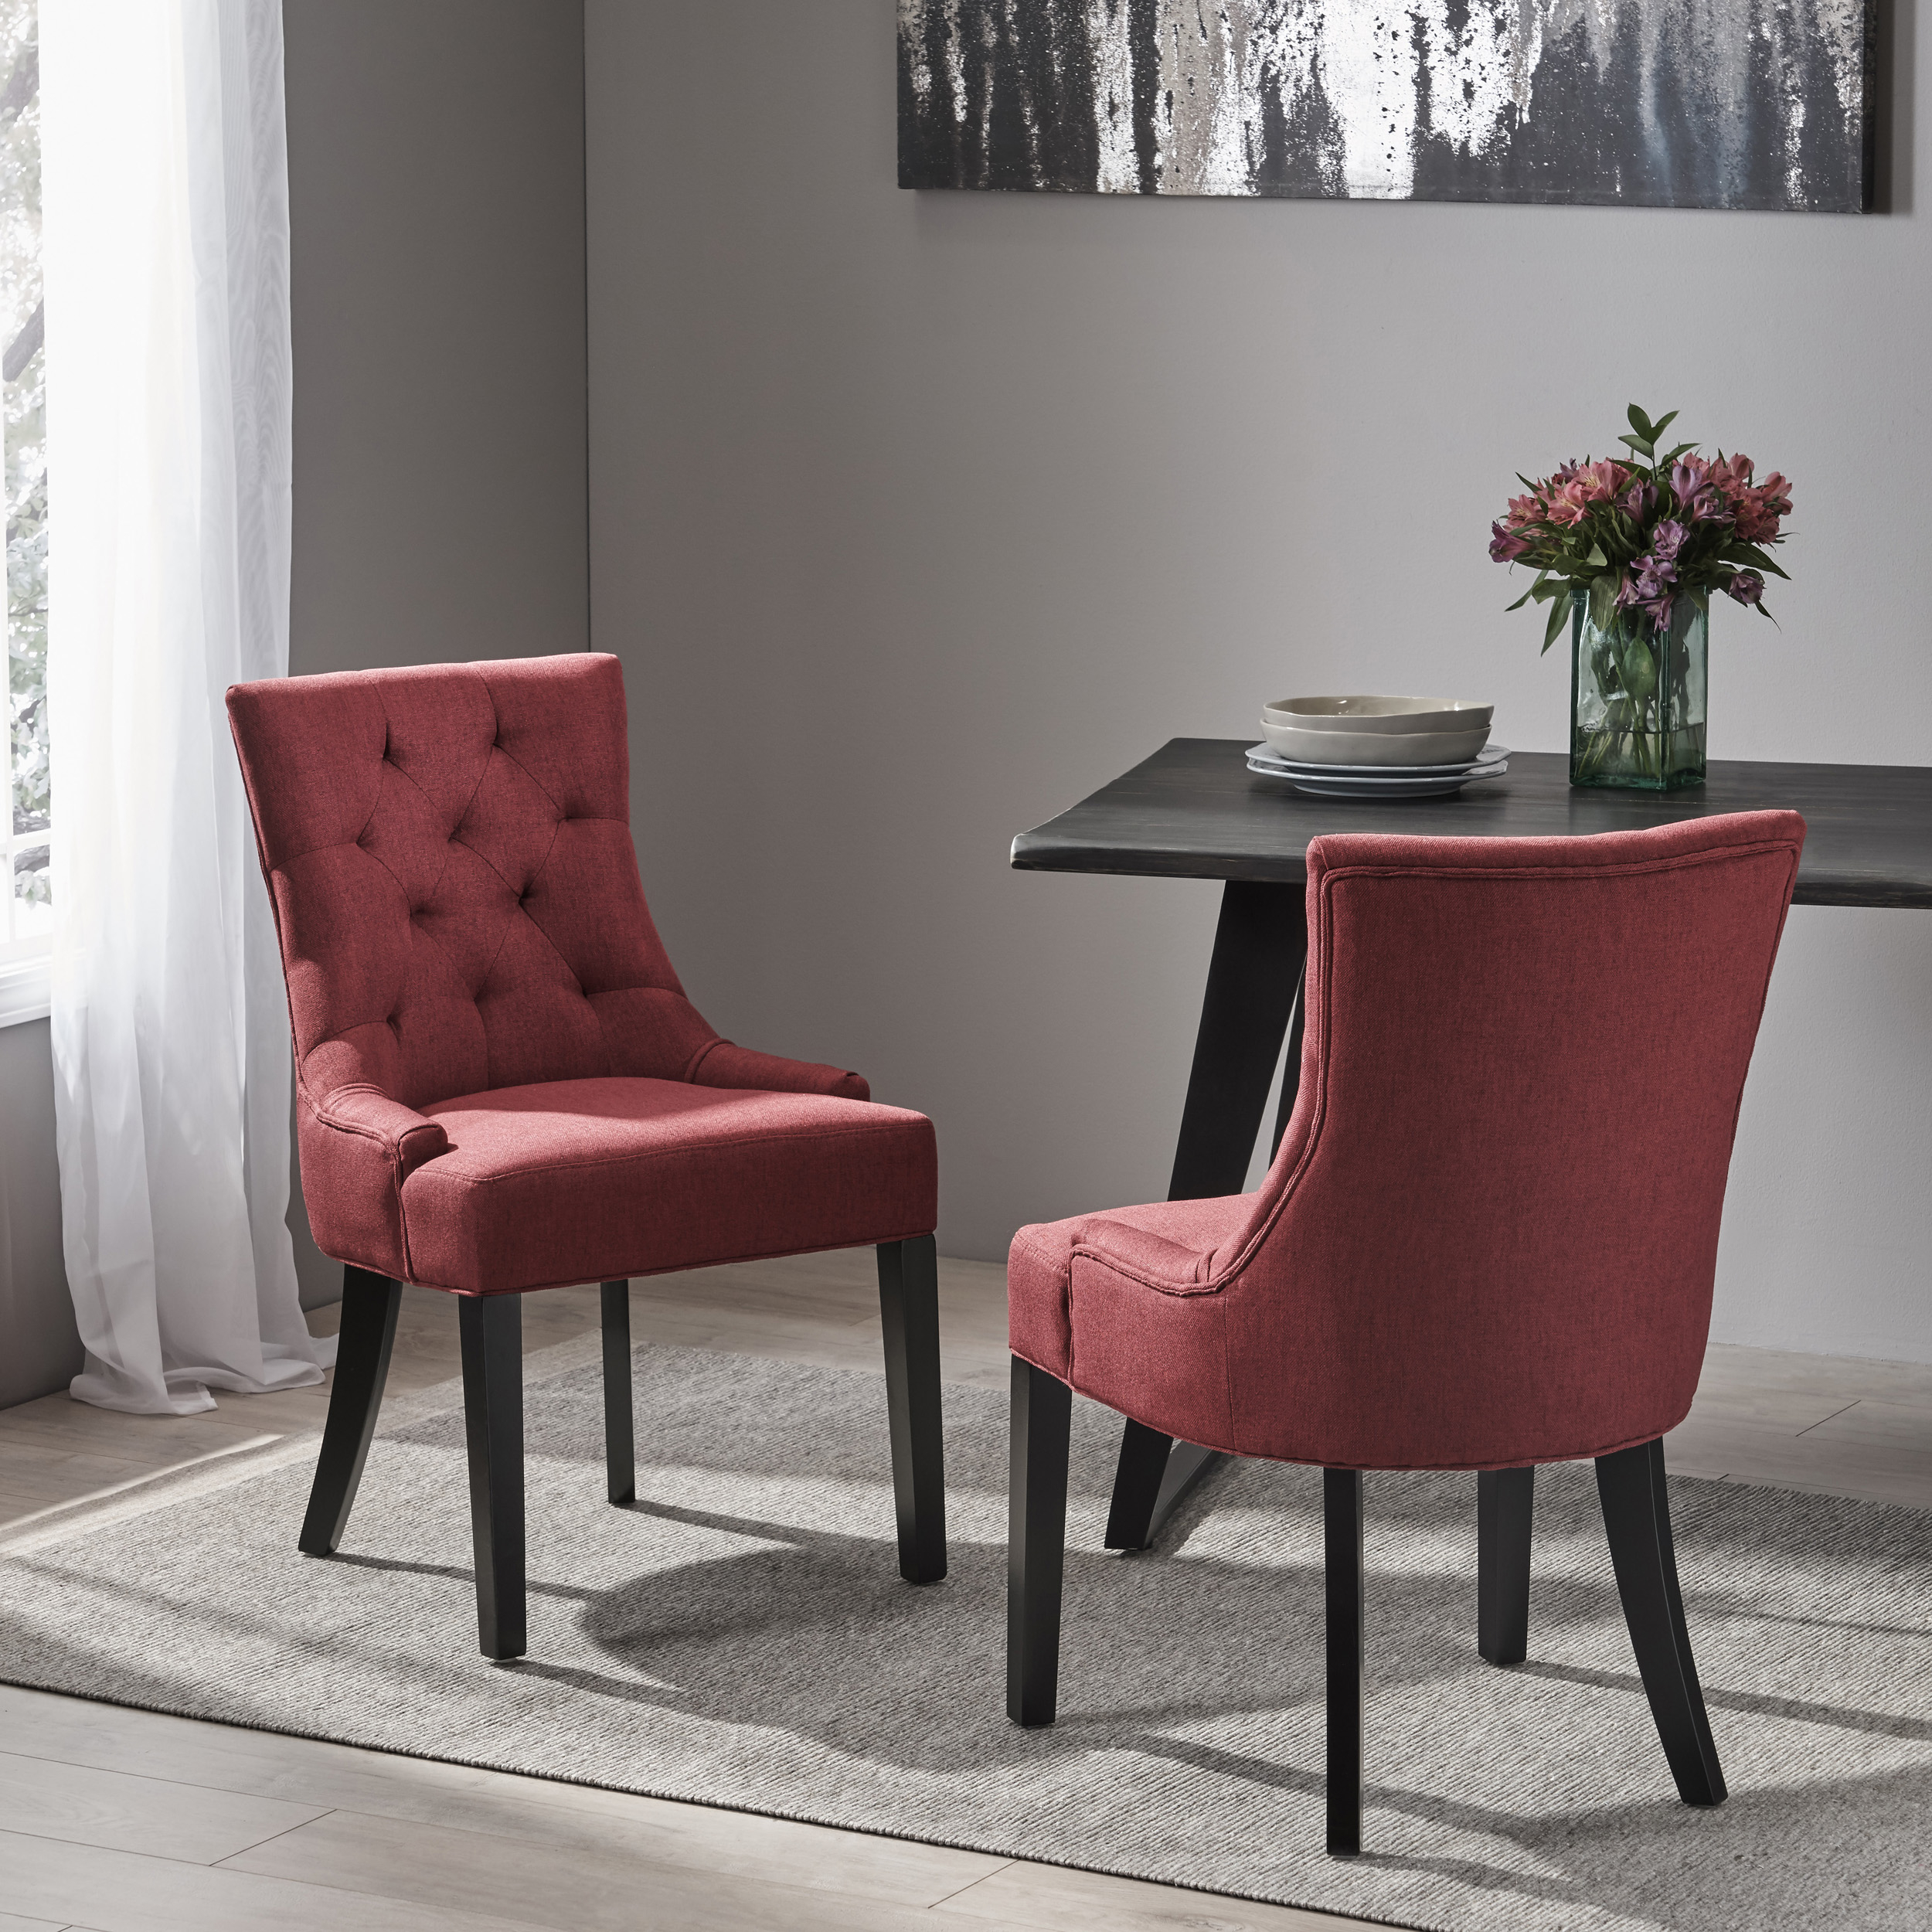 MMaggie Contemporary Buttonless Tufted Diamond Stitch Dining Chairs, Set Of 2 - Deep Red